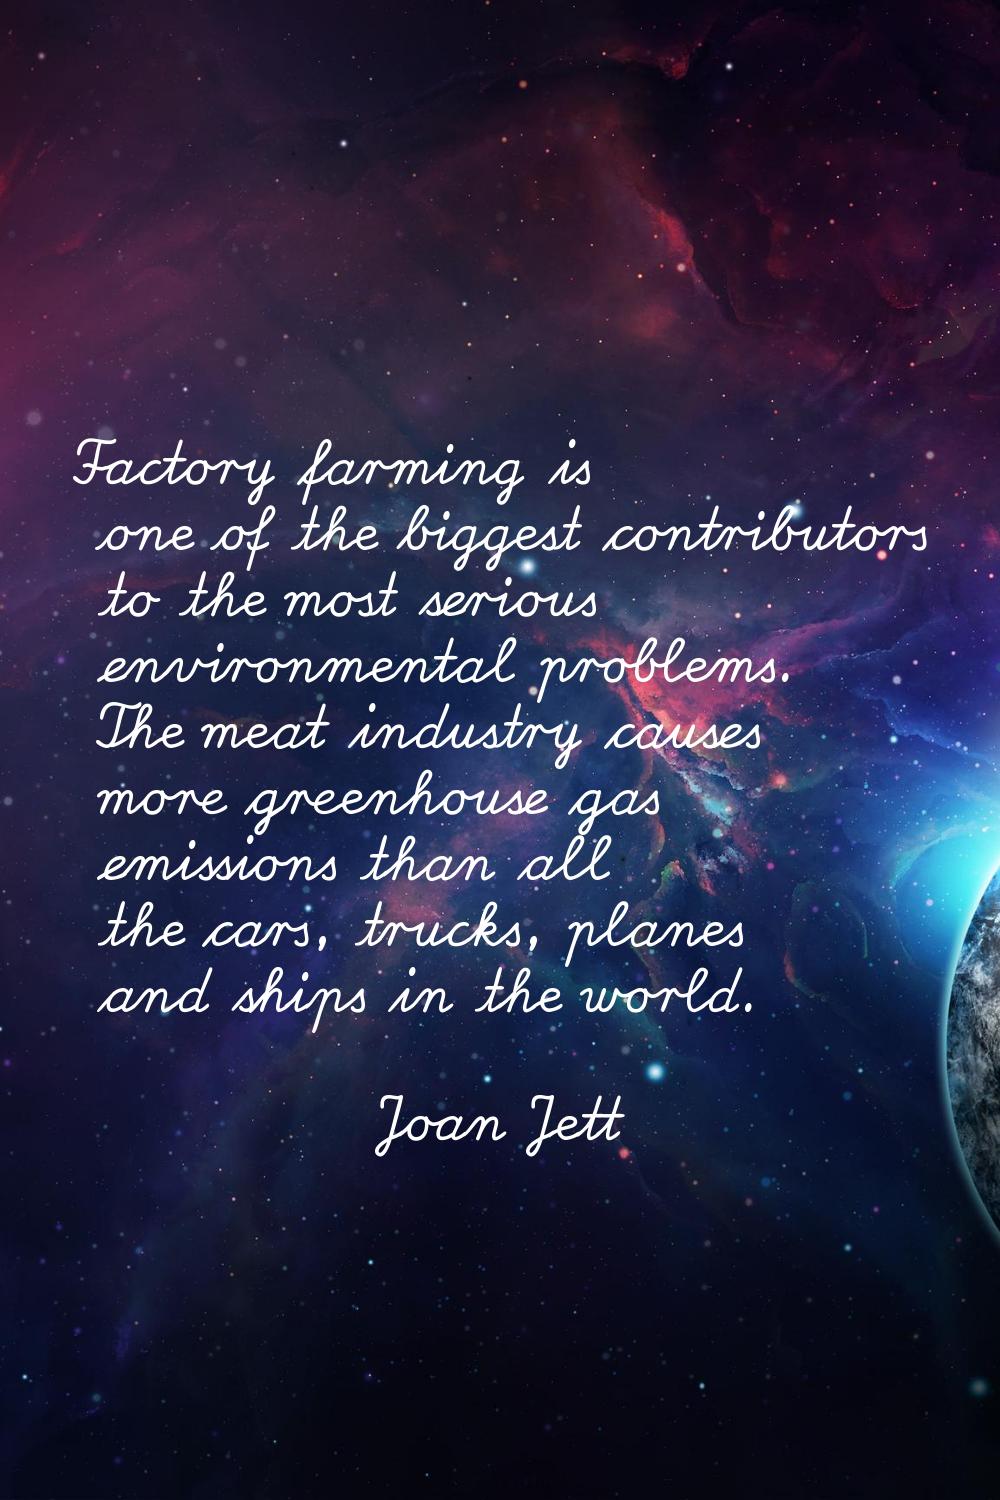 Factory farming is one of the biggest contributors to the most serious environmental problems. The 